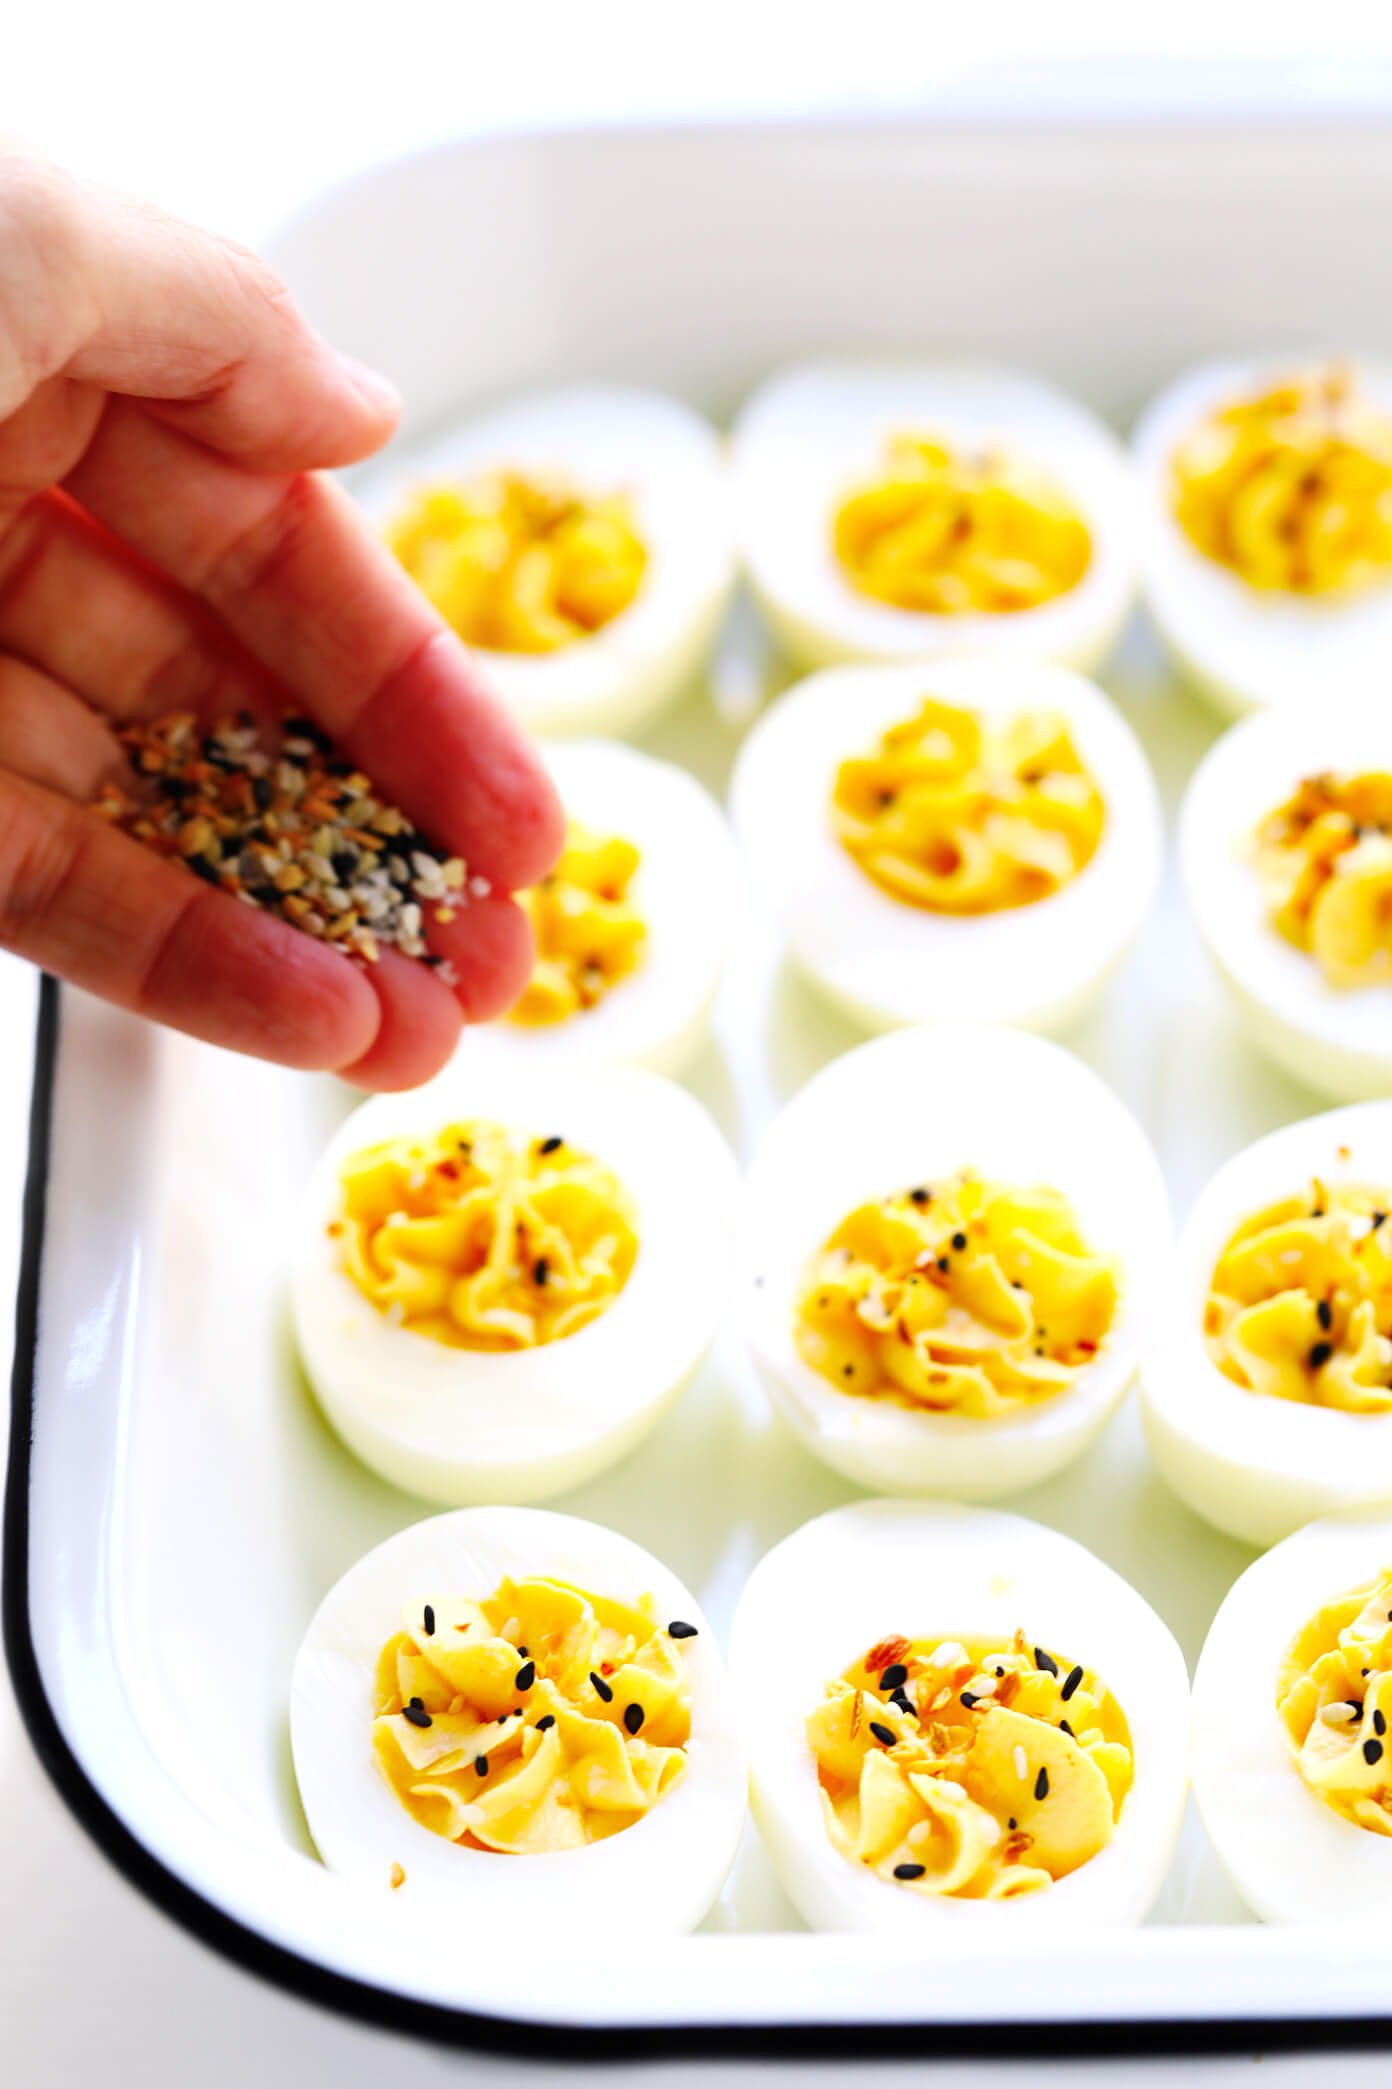 How To Make Deviled Eggs with Everything Bagel Seasoning